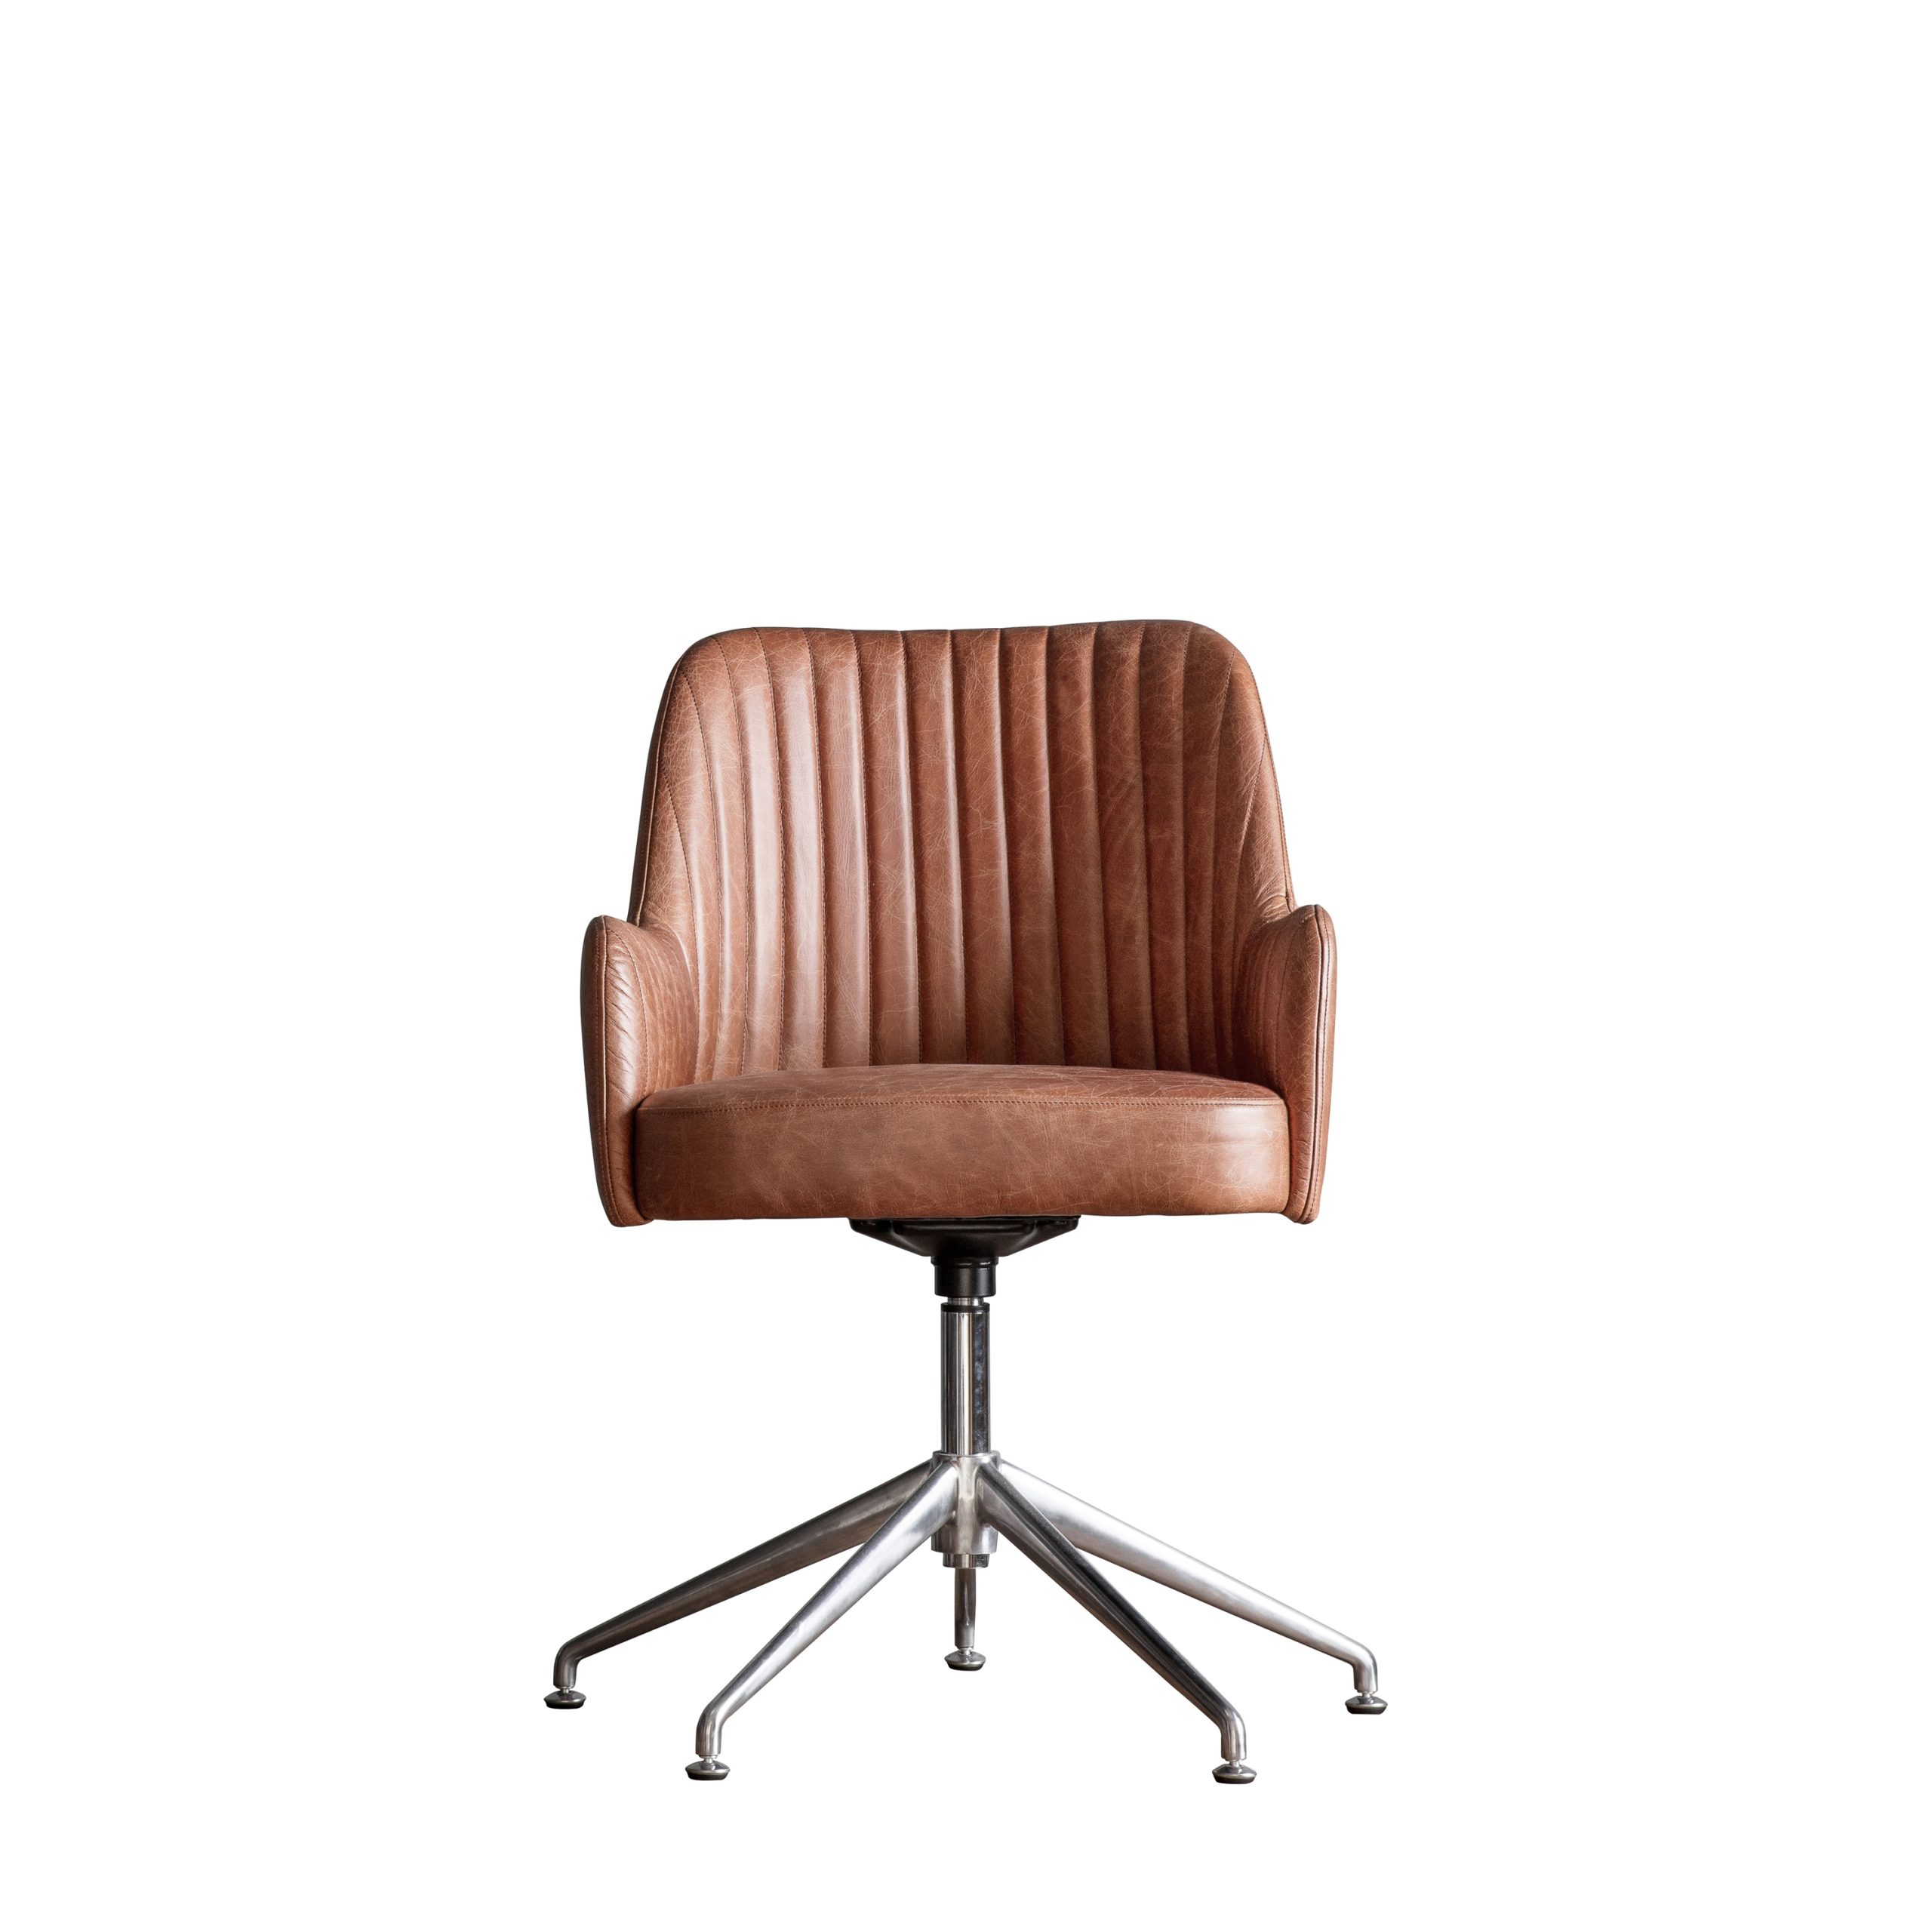 Gallery Direct Curie Swivel Chair Vintage Brown Leather